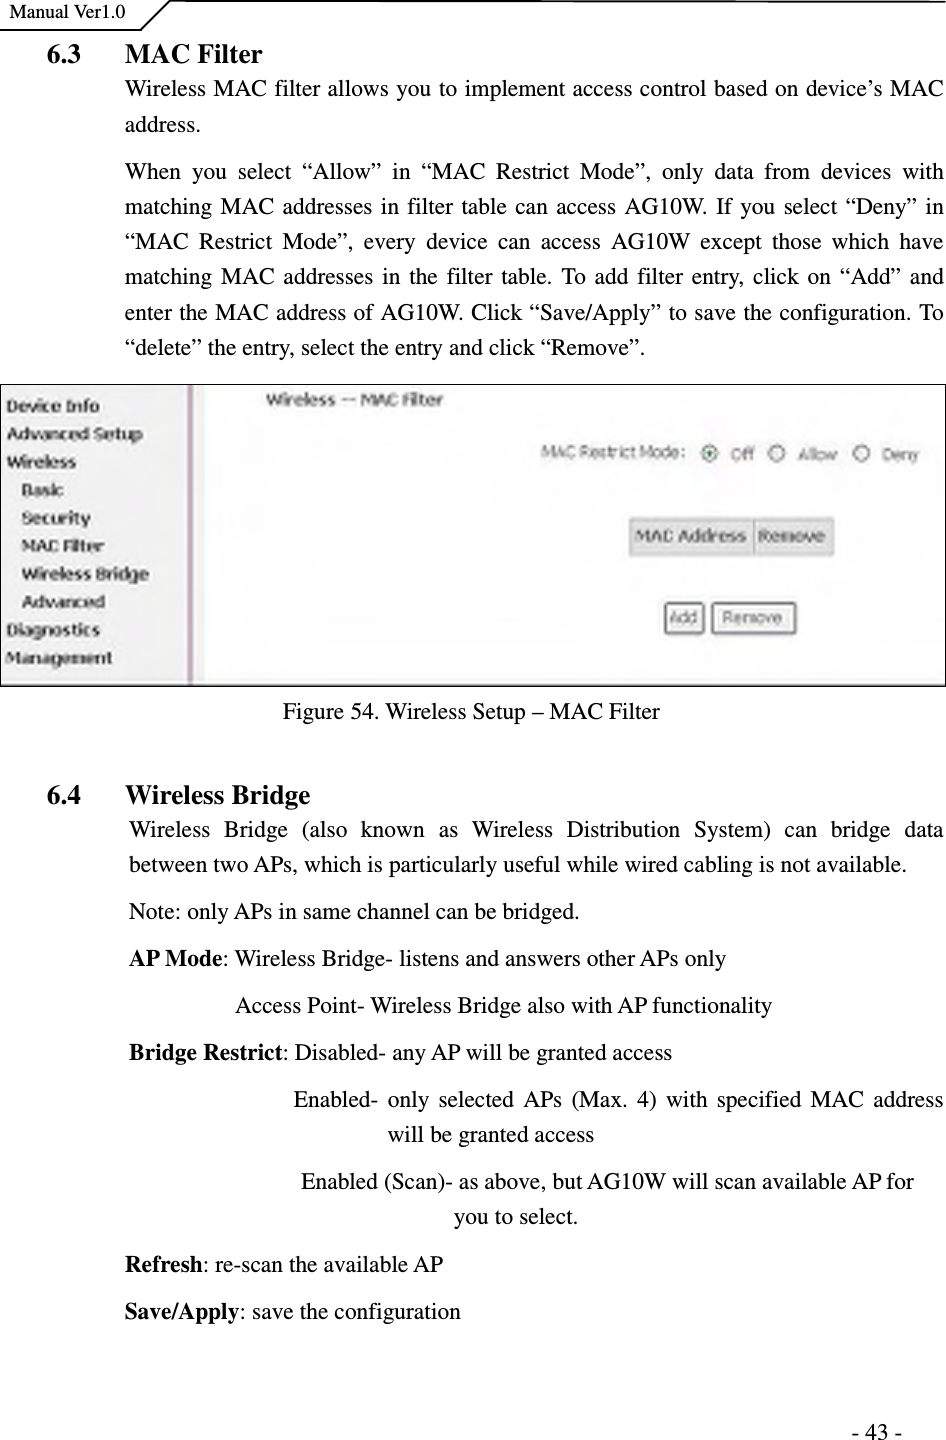    Manual Ver1.0                                                                      - 43 - 6.3 MAC Filter   Wireless MAC filter allows you to implement access control based on device’s MAC address. When  you  select  “Allow”  in  “MAC  Restrict  Mode”,  only  data  from  devices  with matching MAC addresses in filter table can access AG10W. If you select “Deny” in “MAC  Restrict  Mode”,  every  device  can  access  AG10W  except  those  which  have matching MAC addresses in the filter table. To add filter entry, click on “Add” and enter the MAC address of AG10W. Click “Save/Apply” to save the configuration. To “delete” the entry, select the entry and click “Remove”. Figure 54. Wireless Setup – MAC Filter  6.4 Wireless Bridge Wireless  Bridge  (also  known  as  Wireless  Distribution  System)  can  bridge  data between two APs, which is particularly useful while wired cabling is not available.   Note: only APs in same channel can be bridged. AP Mode: Wireless Bridge- listens and answers other APs only                     Access Point- Wireless Bridge also with AP functionality Bridge Restrict: Disabled- any AP will be granted access                             Enabled-  only selected APs (Max. 4) with specified MAC  address will be granted access                                 Enabled (Scan)- as above, but AG10W will scan available AP for you to select. Refresh: re-scan the available AP Save/Apply: save the configuration  